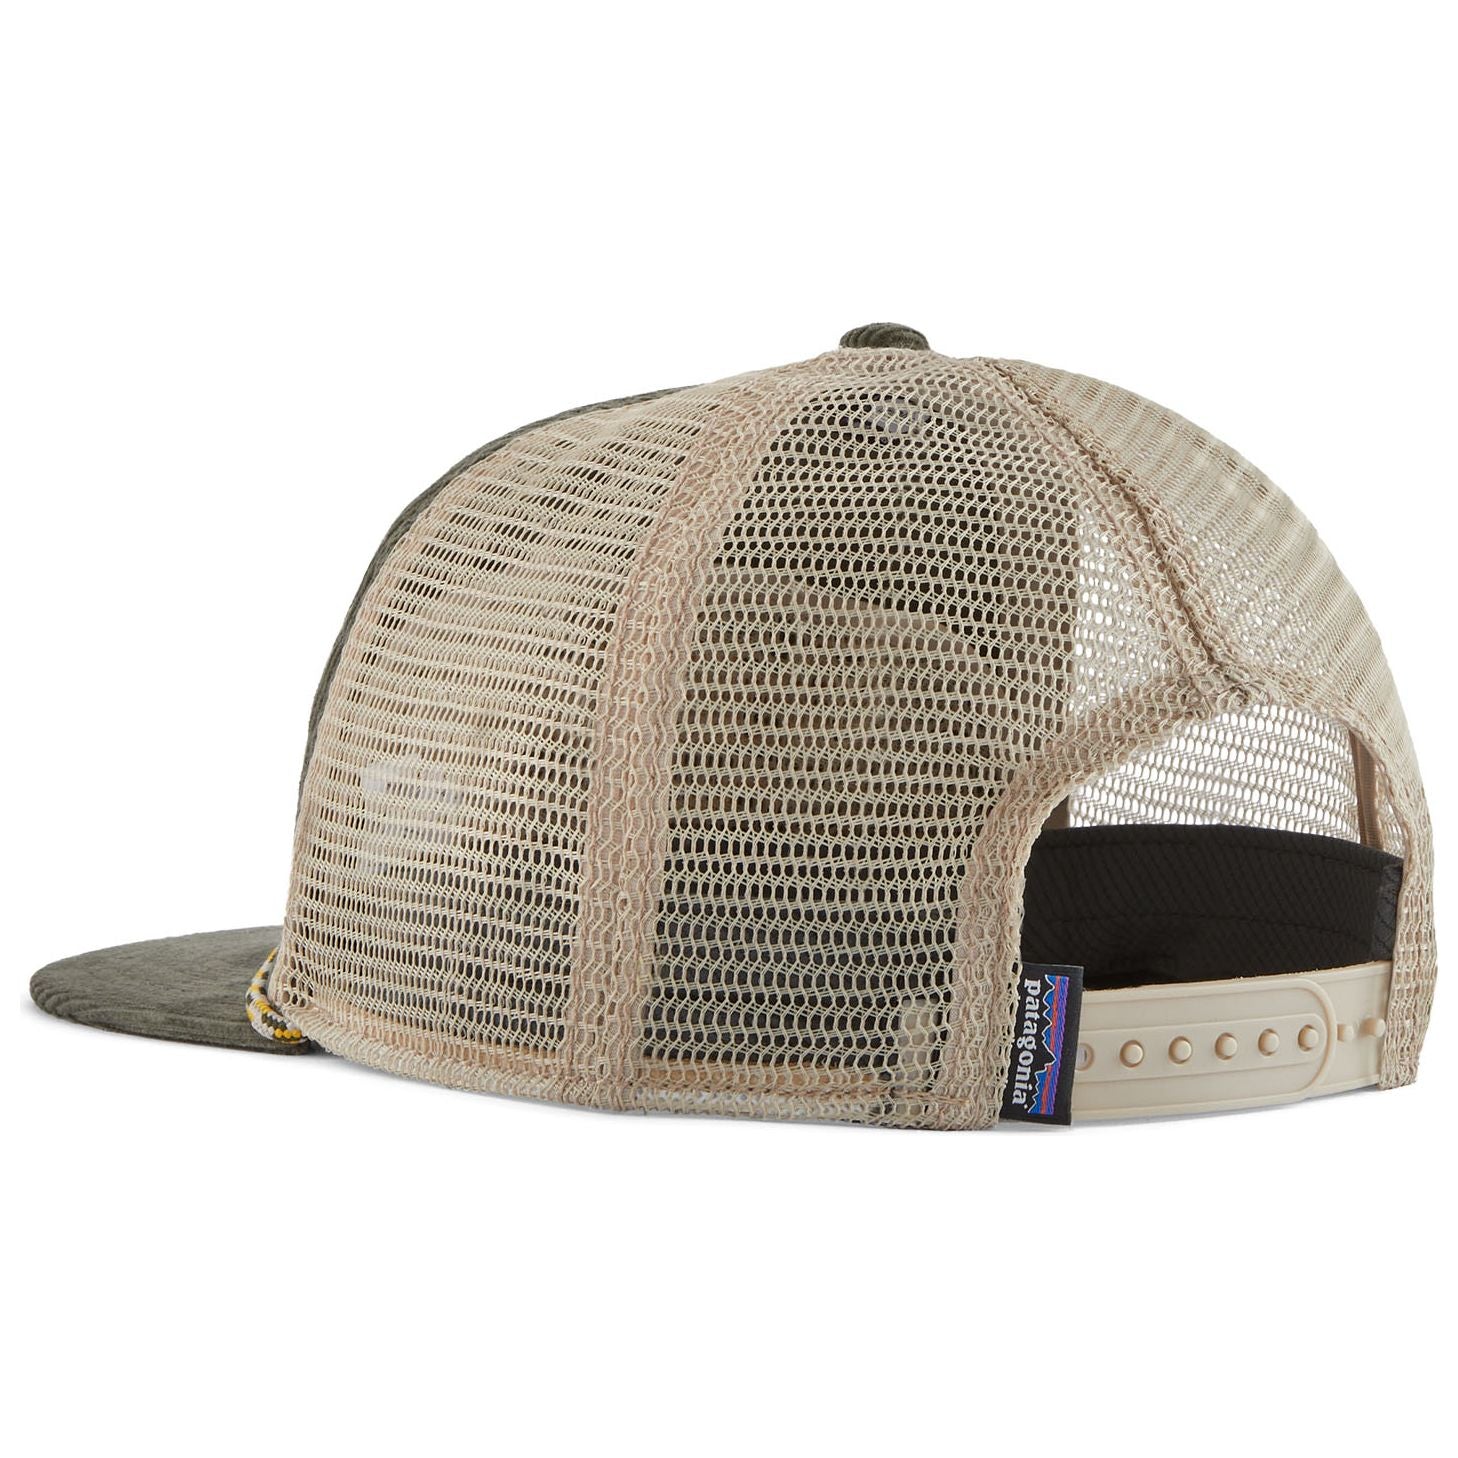 Patagonia, Accessories, Patagonia Fly Catcher Hat New Navy Fly Fishing  Adjustable Corduroy New